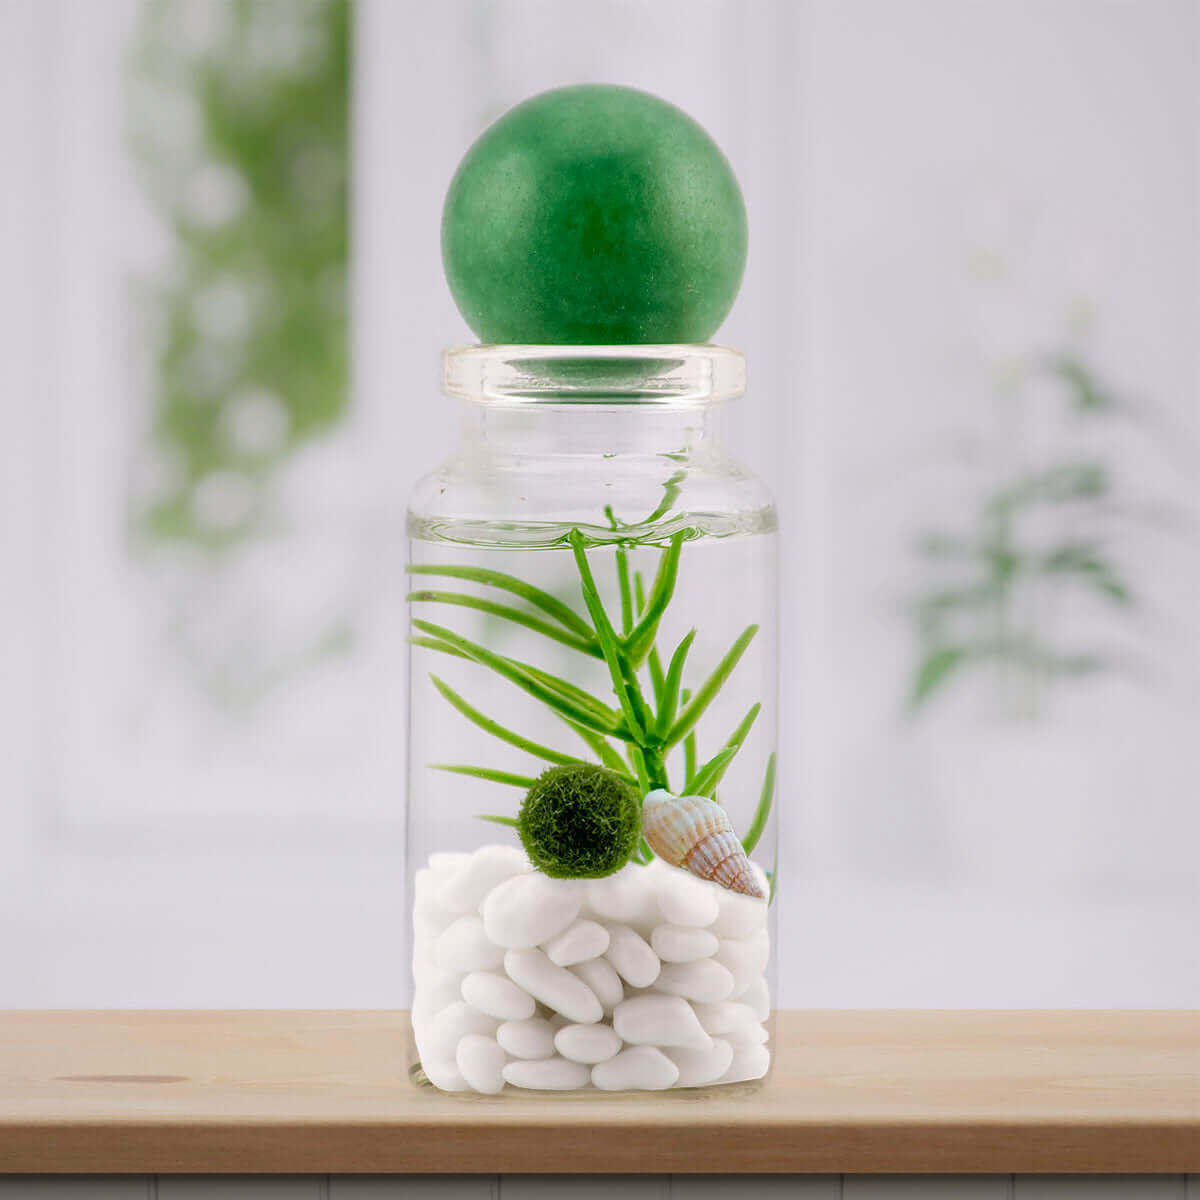 Moss Ball Pets: Buy Premium Marimo & Elevate Your Space!